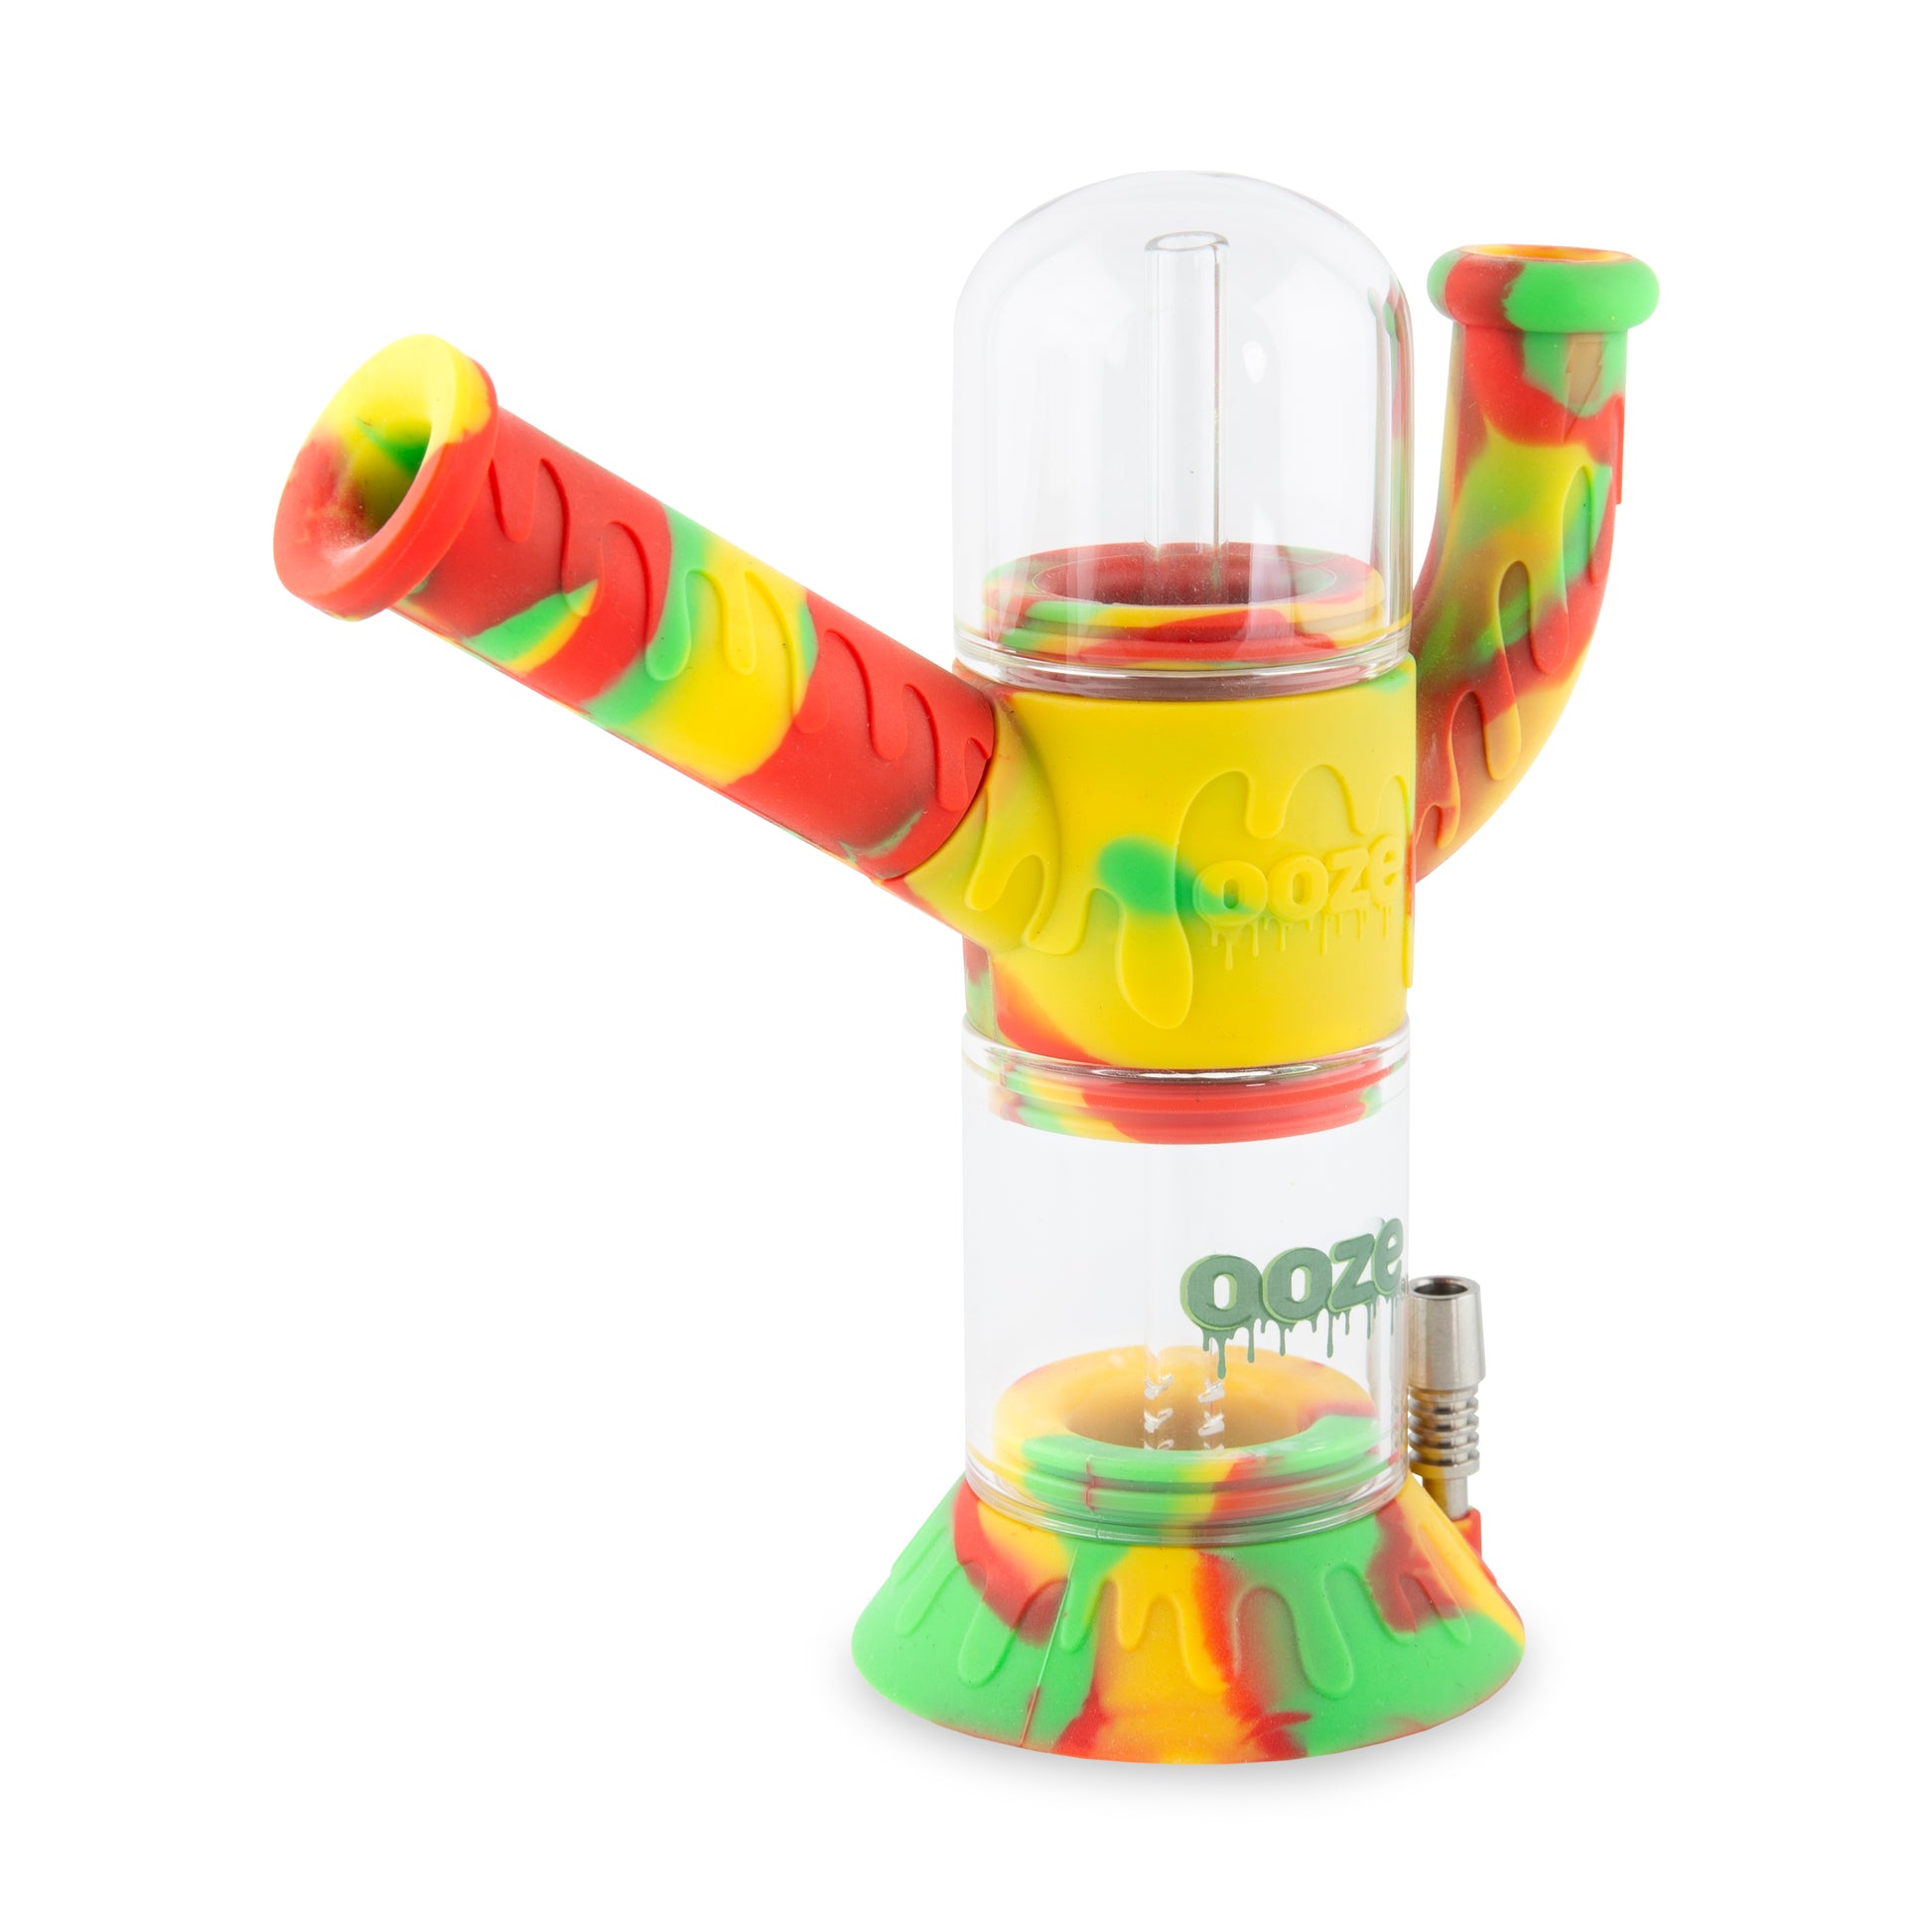 Silicone Nectar Collector Dab Straw – Myxed Up Creations, Glass Pipes, Vaporizers, E-Cigs, Detox